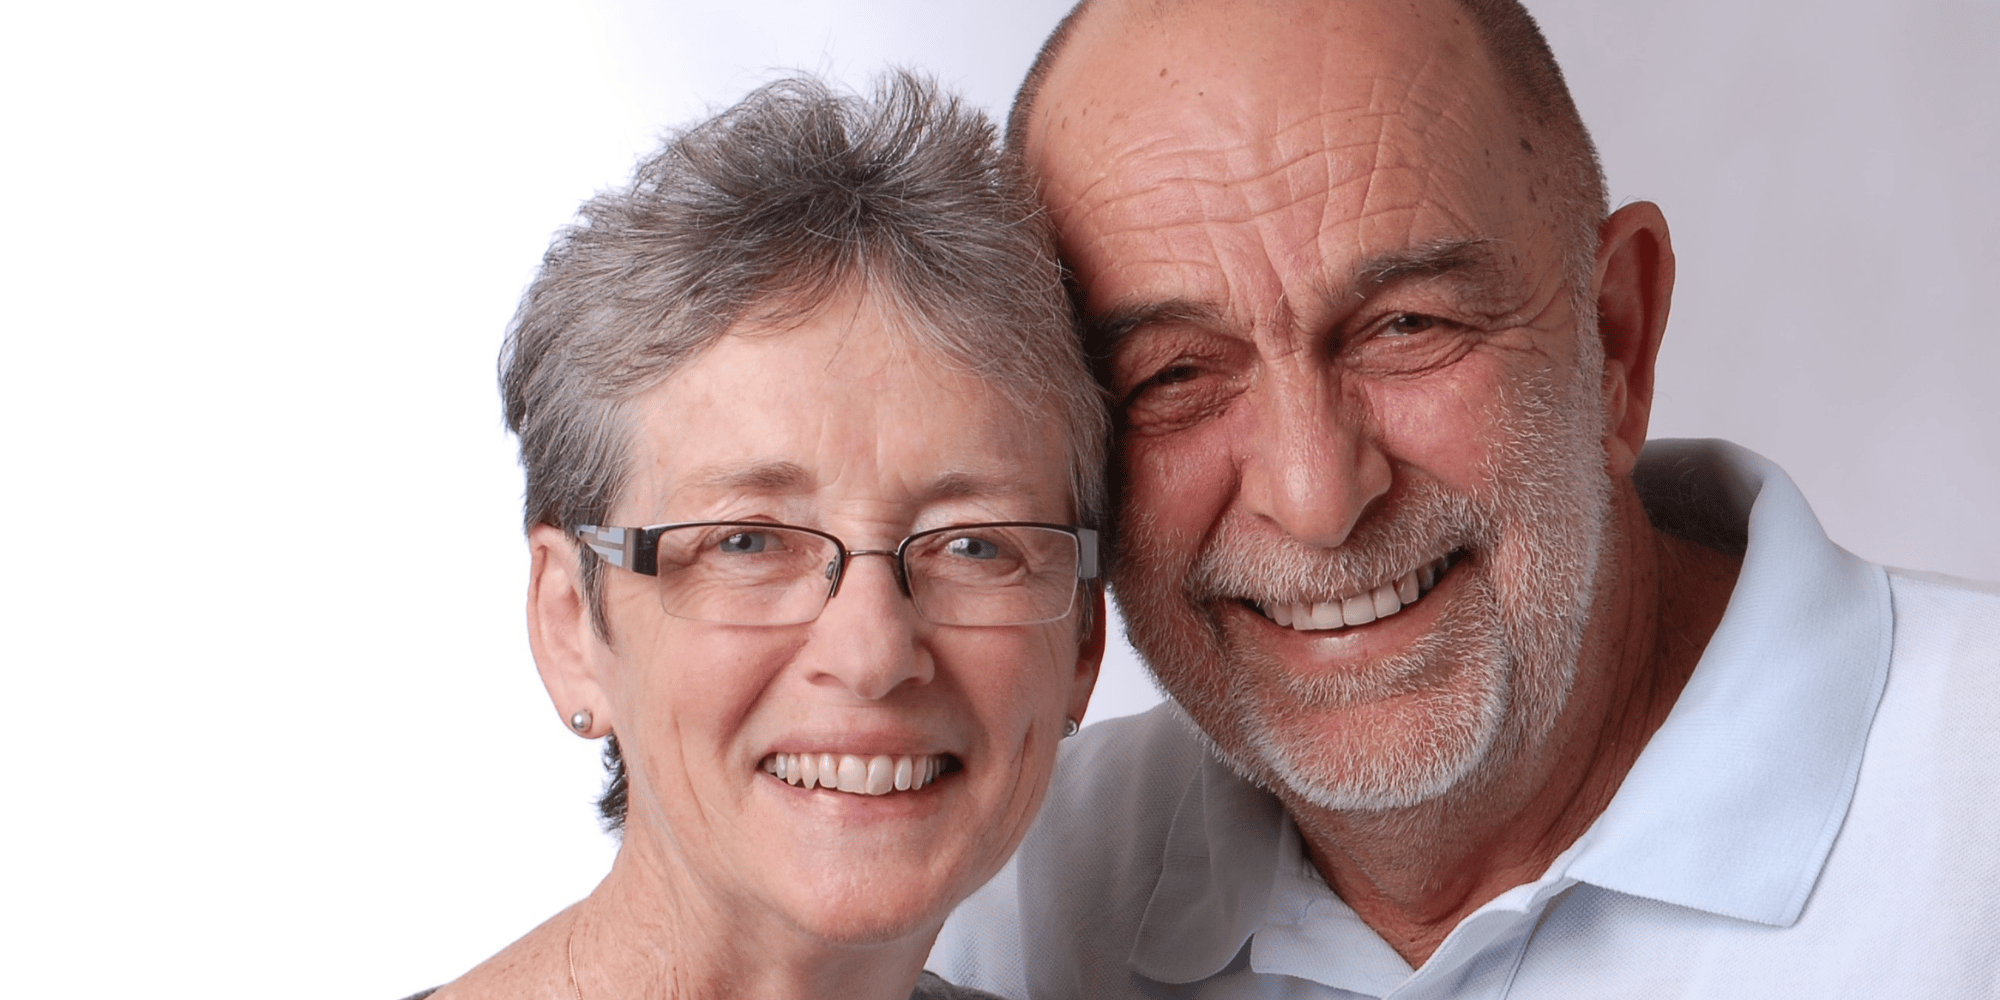 Carolyn and David’s story: a gift of love